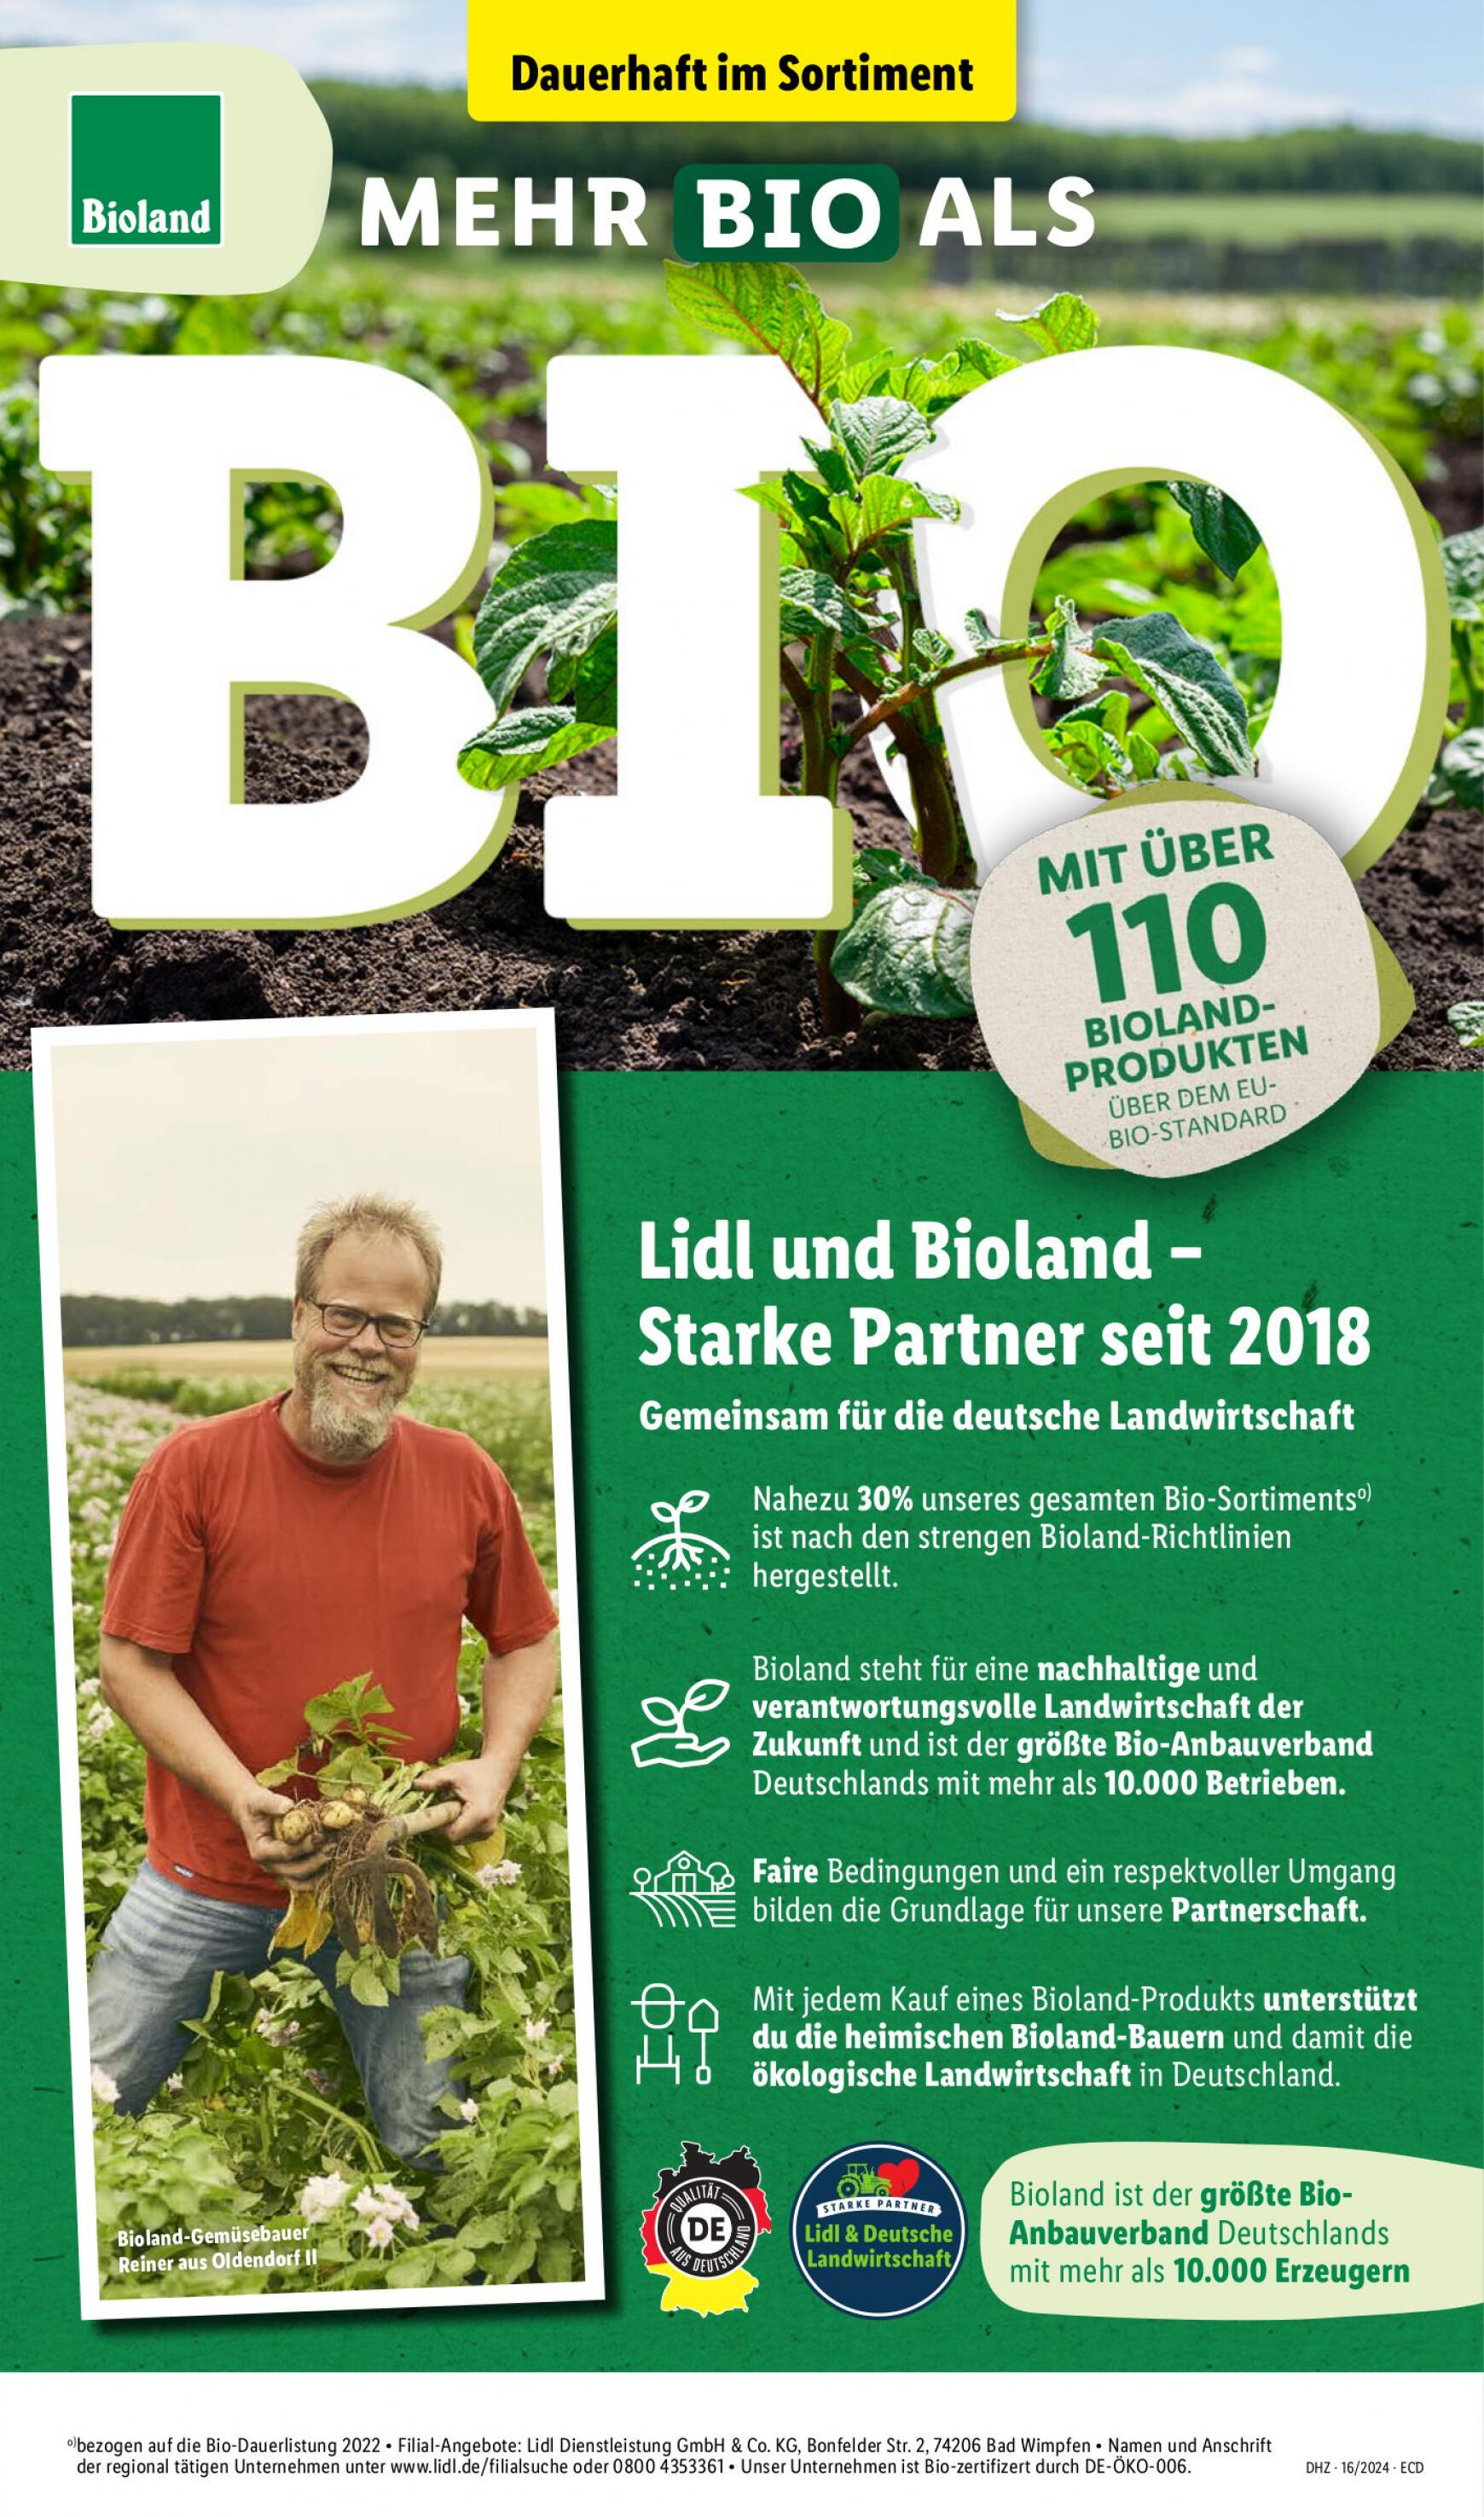 lidl - Flyer Lidl aktuell 15.04. - 20.04. - page: 59